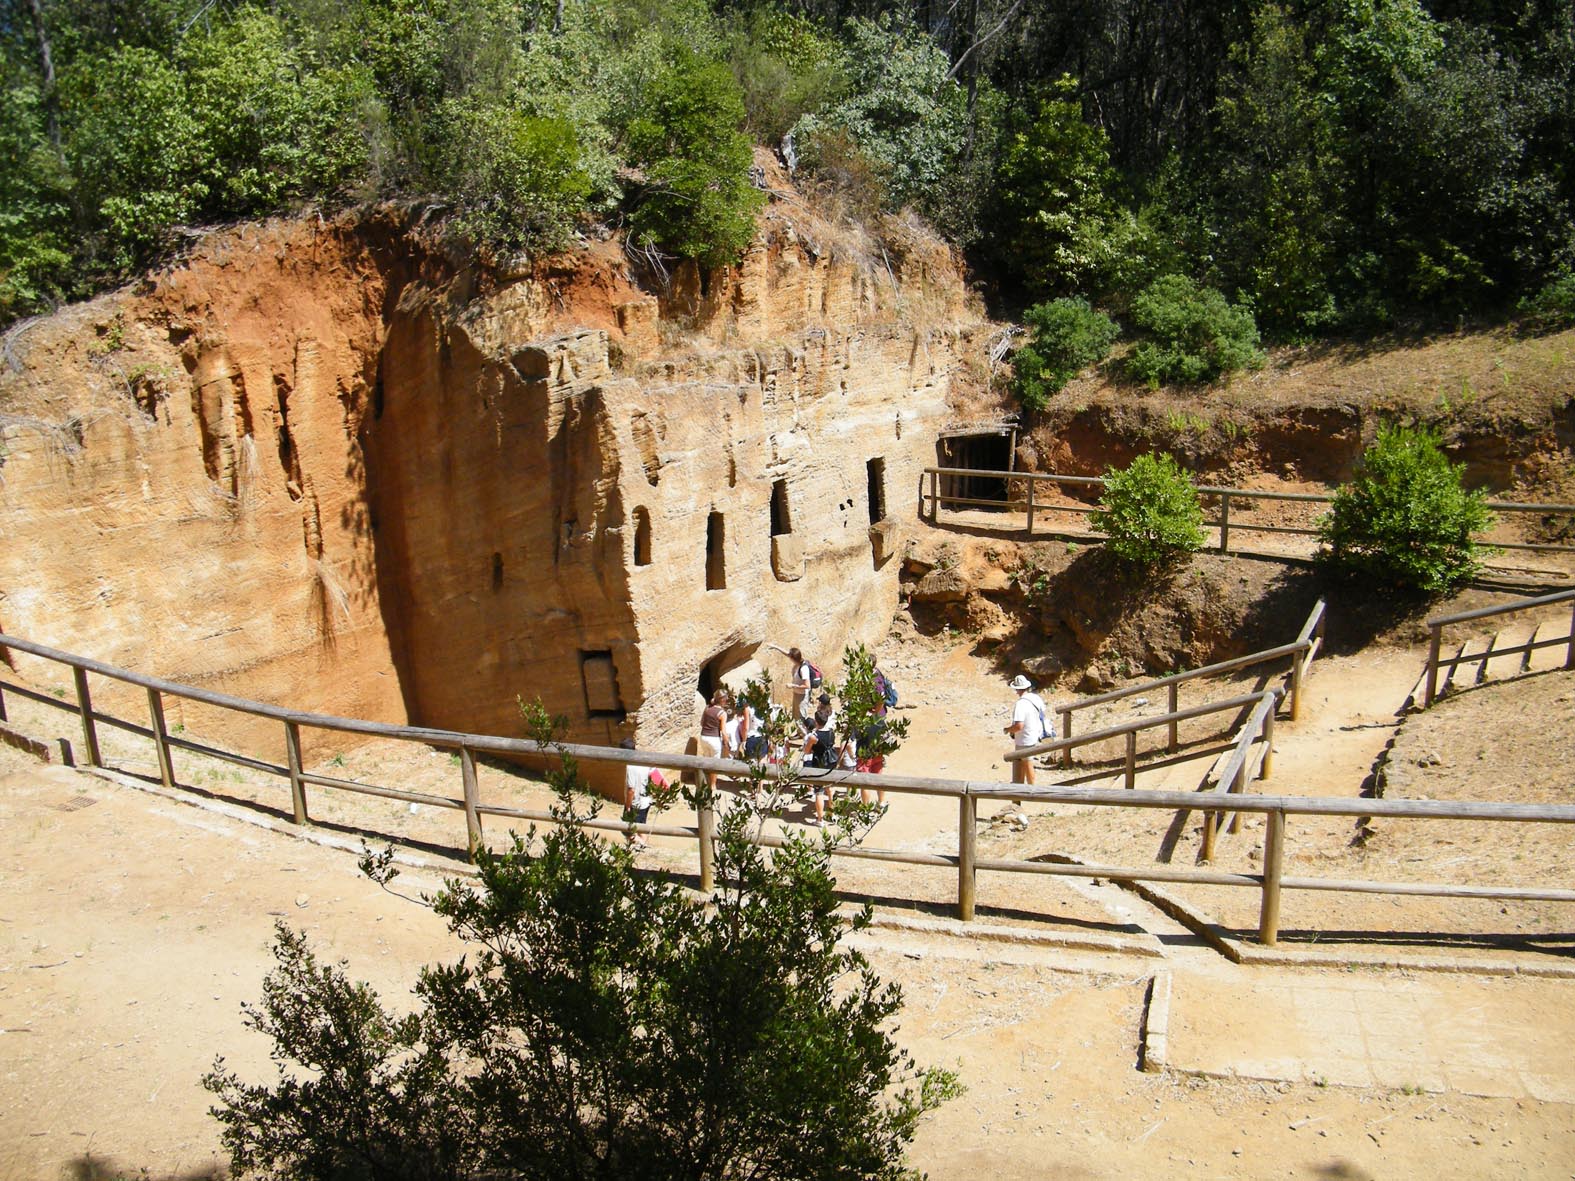 Cave necropolis in the Baratti and Populonia archaeological park